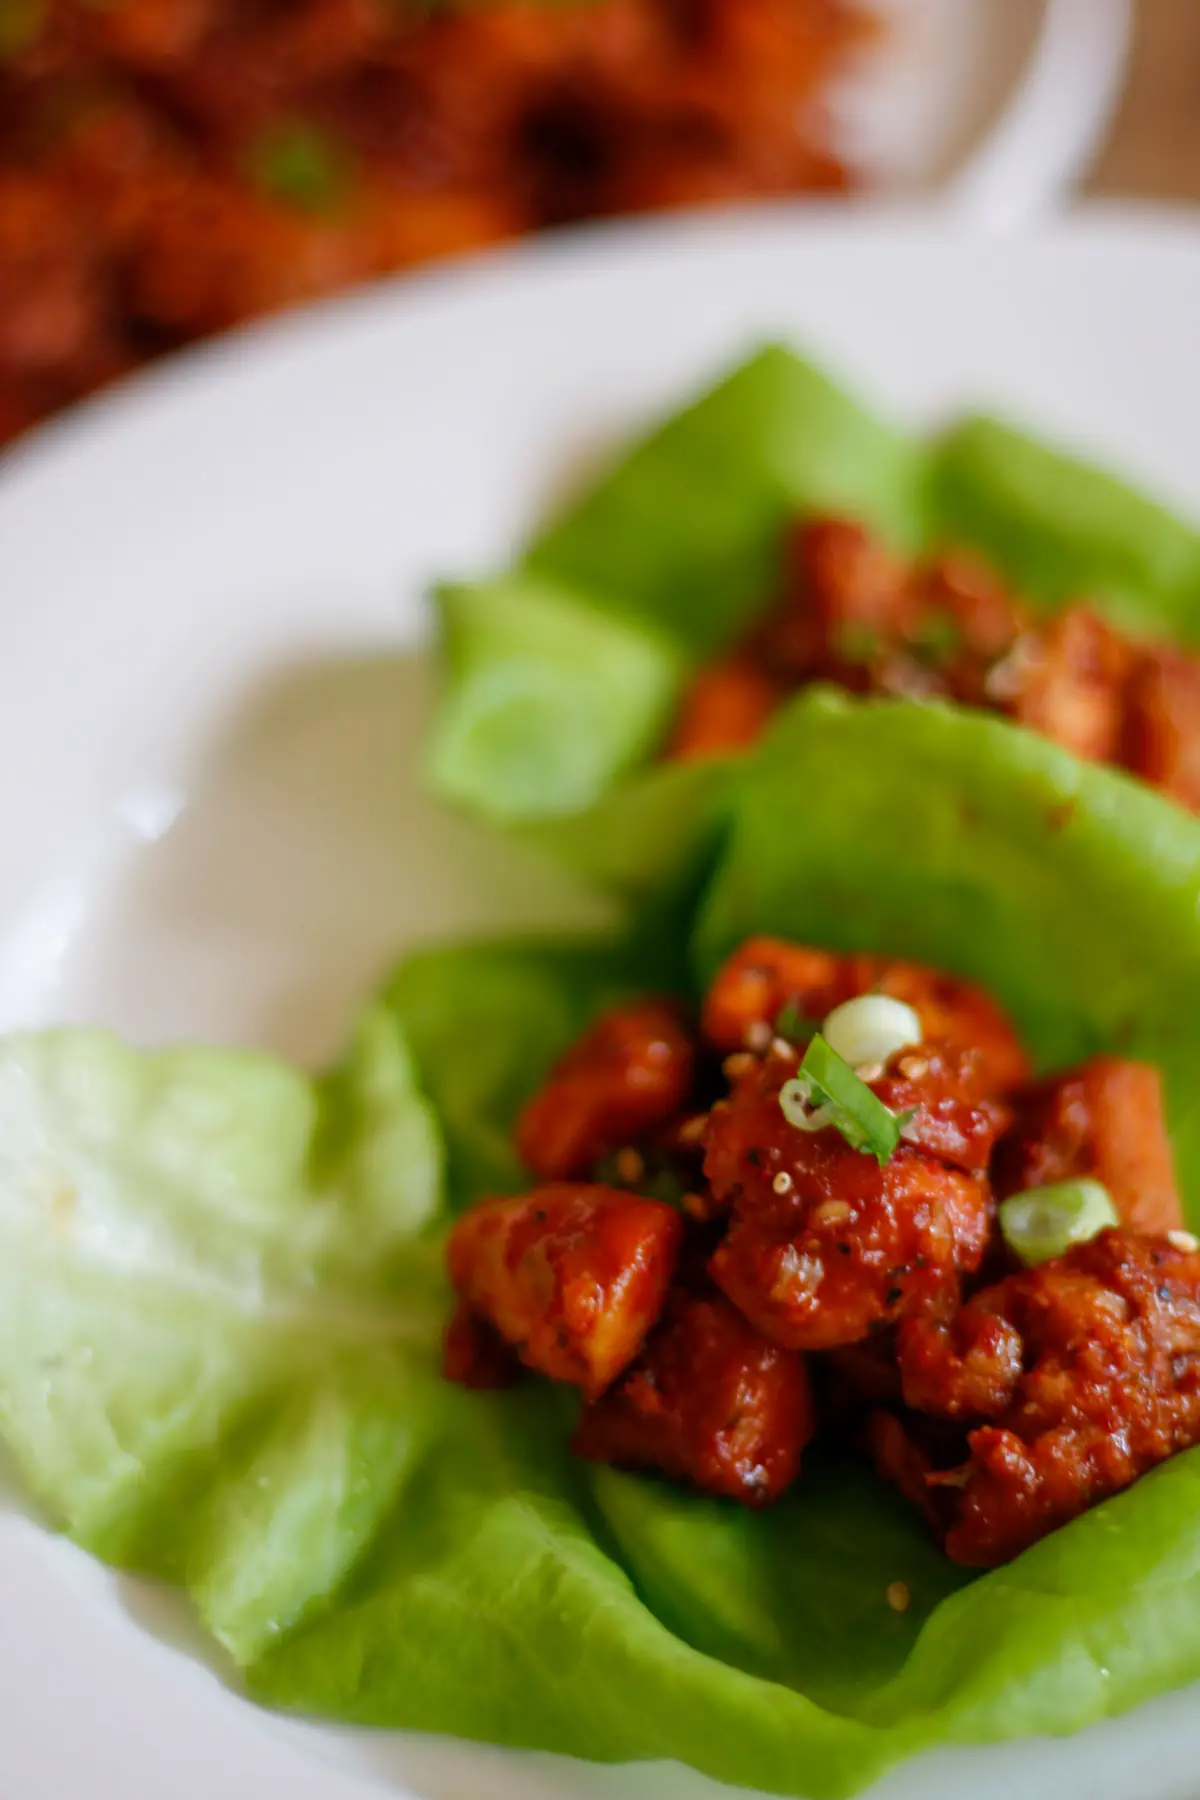 Spicy Chicken bulgogi in lettuce wraps garnished with green onions and sesame seeds on a white plate with more spicy chicken bulgogi in the background.